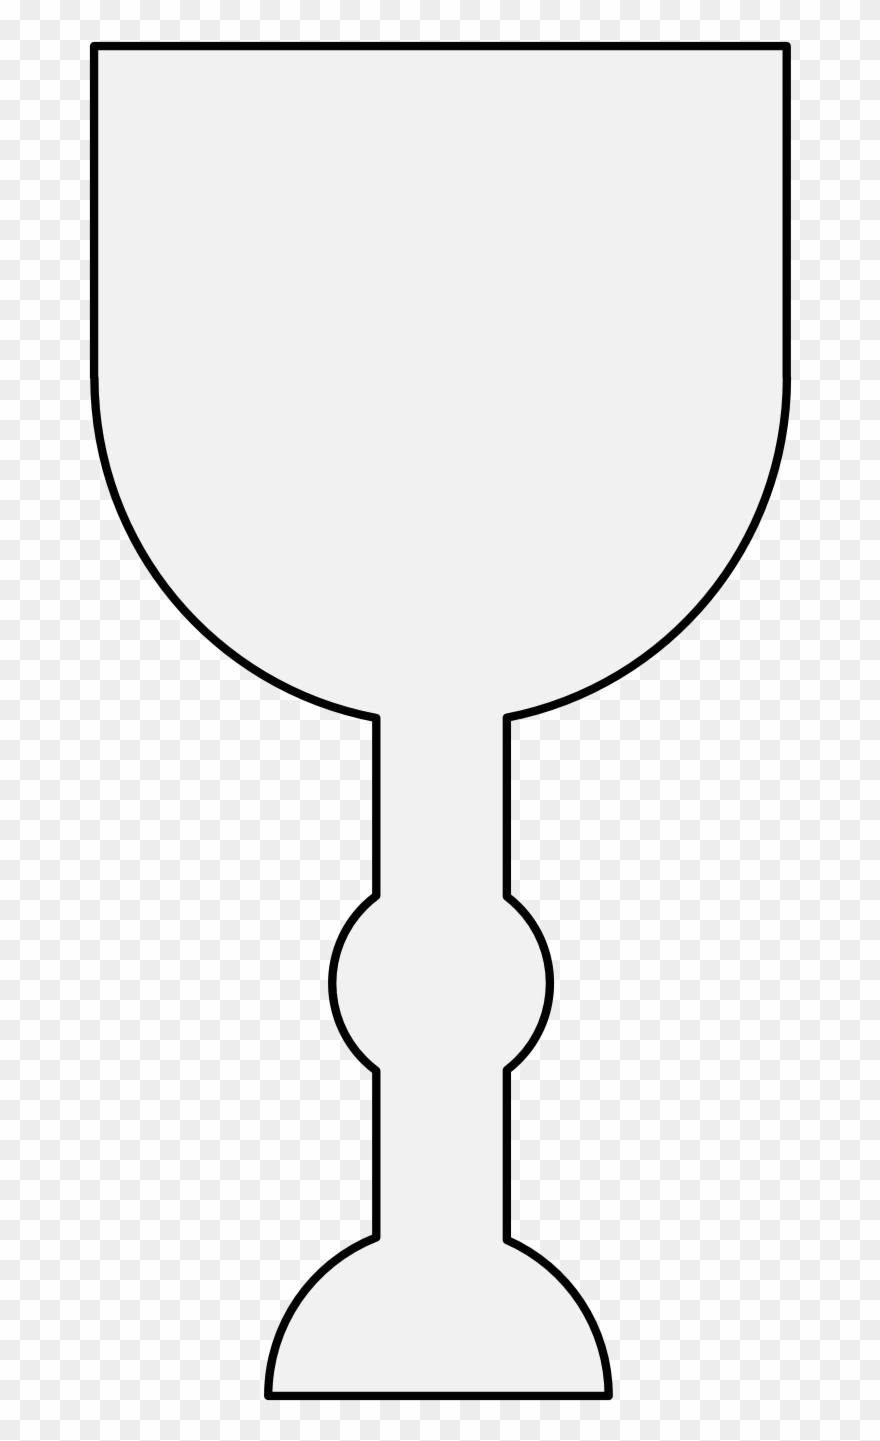 chalice clipart simple